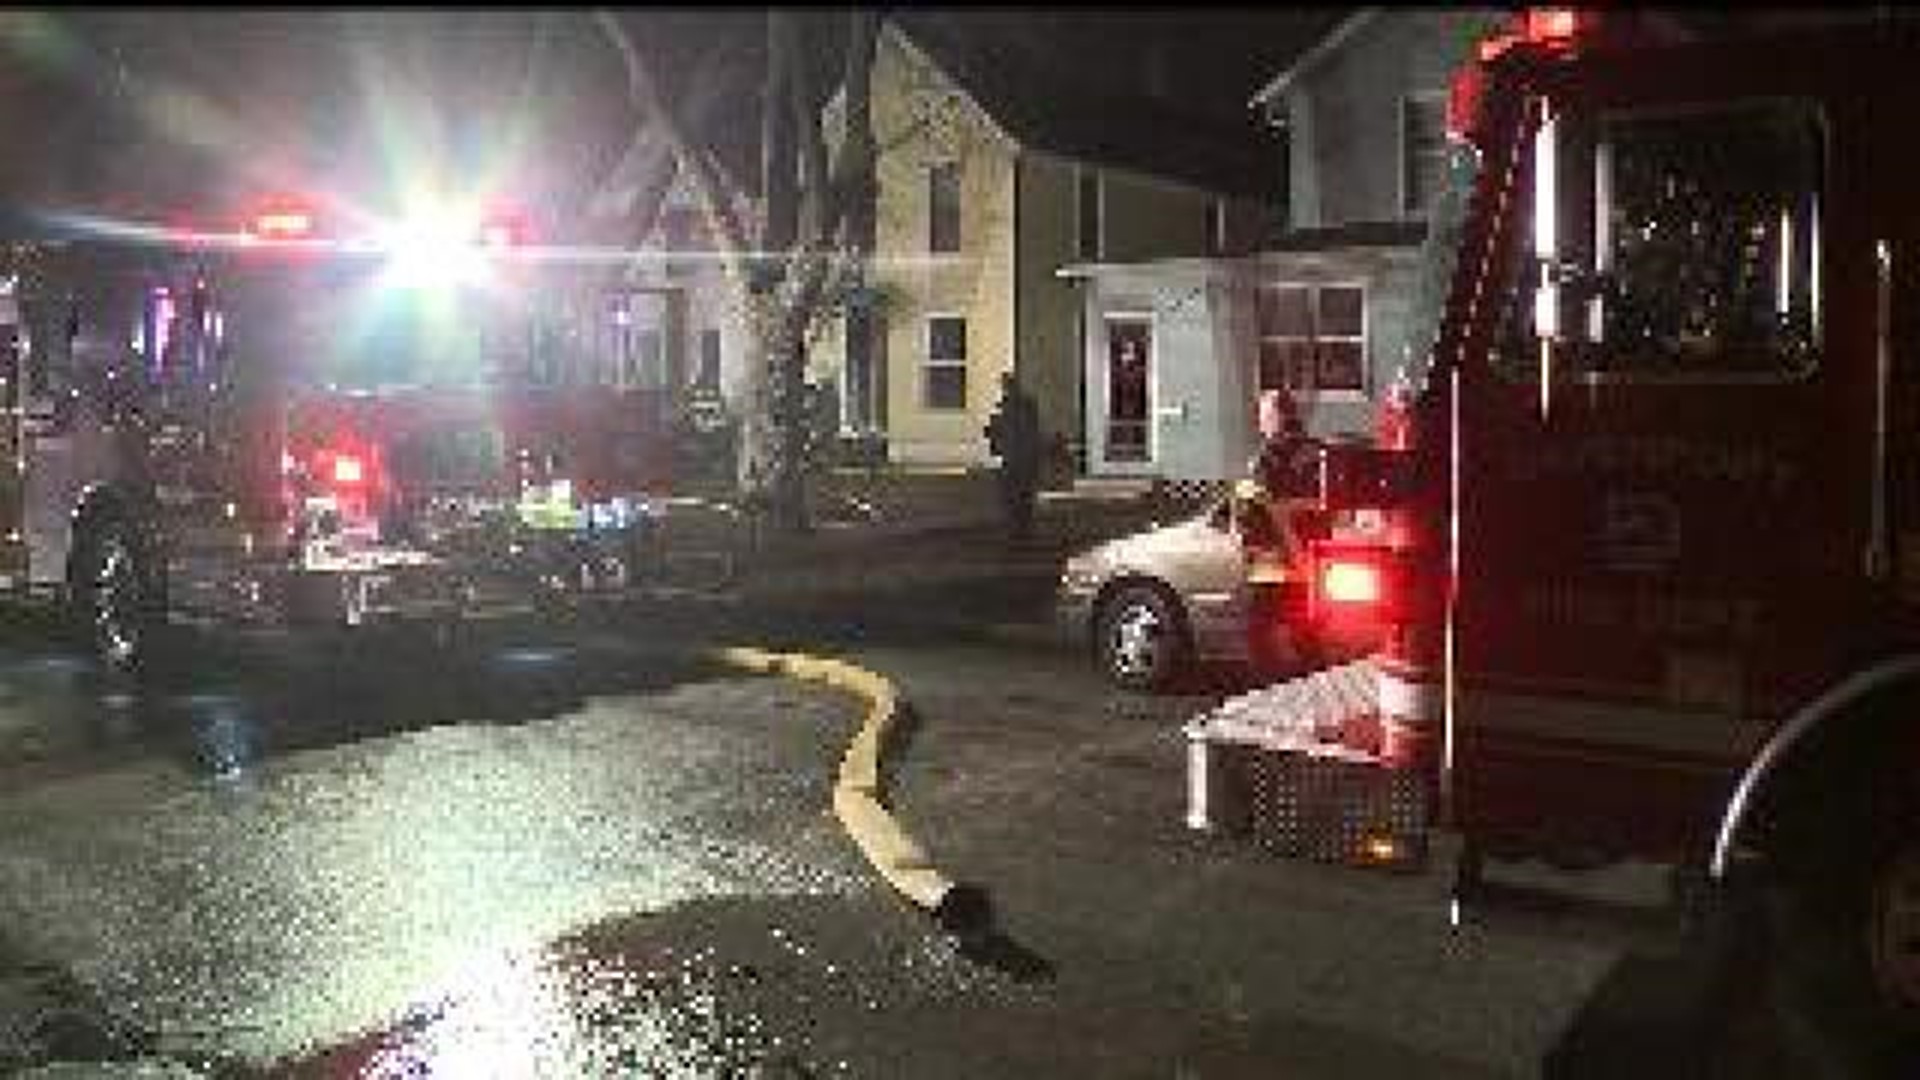 Davenport house fire likely caused in the kitchen